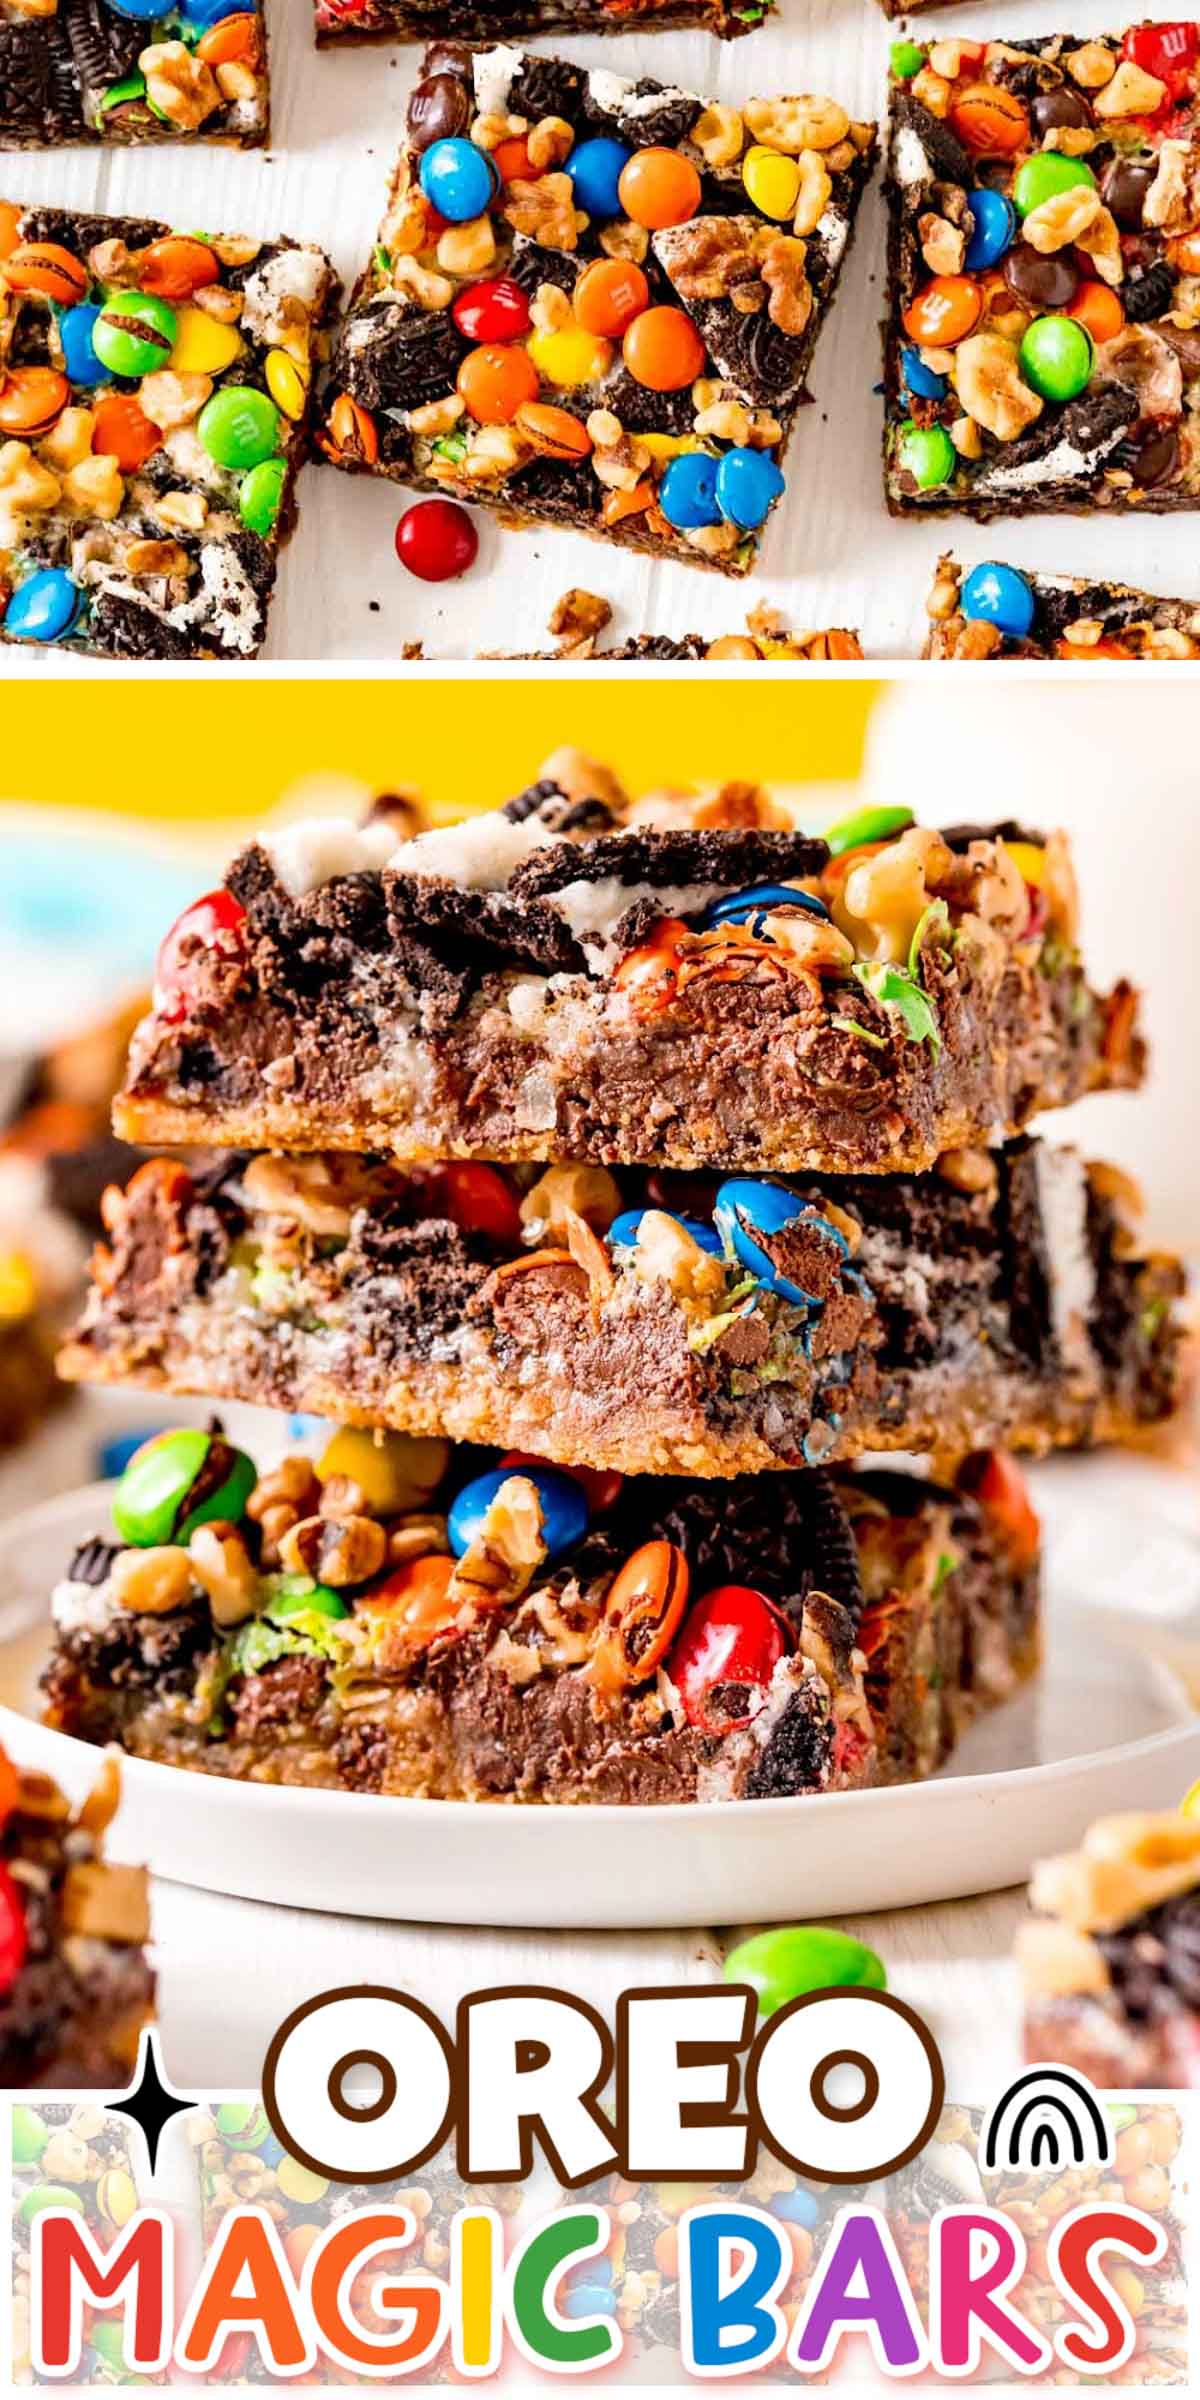 These Oreo Magic Bars have a refrigerated cookie dough base and are overflowing with Oreo cookies, chocolate chunks, coconut, nuts, and M&M's for a rich, tasty, and easy dessert! via @sugarandsoulco